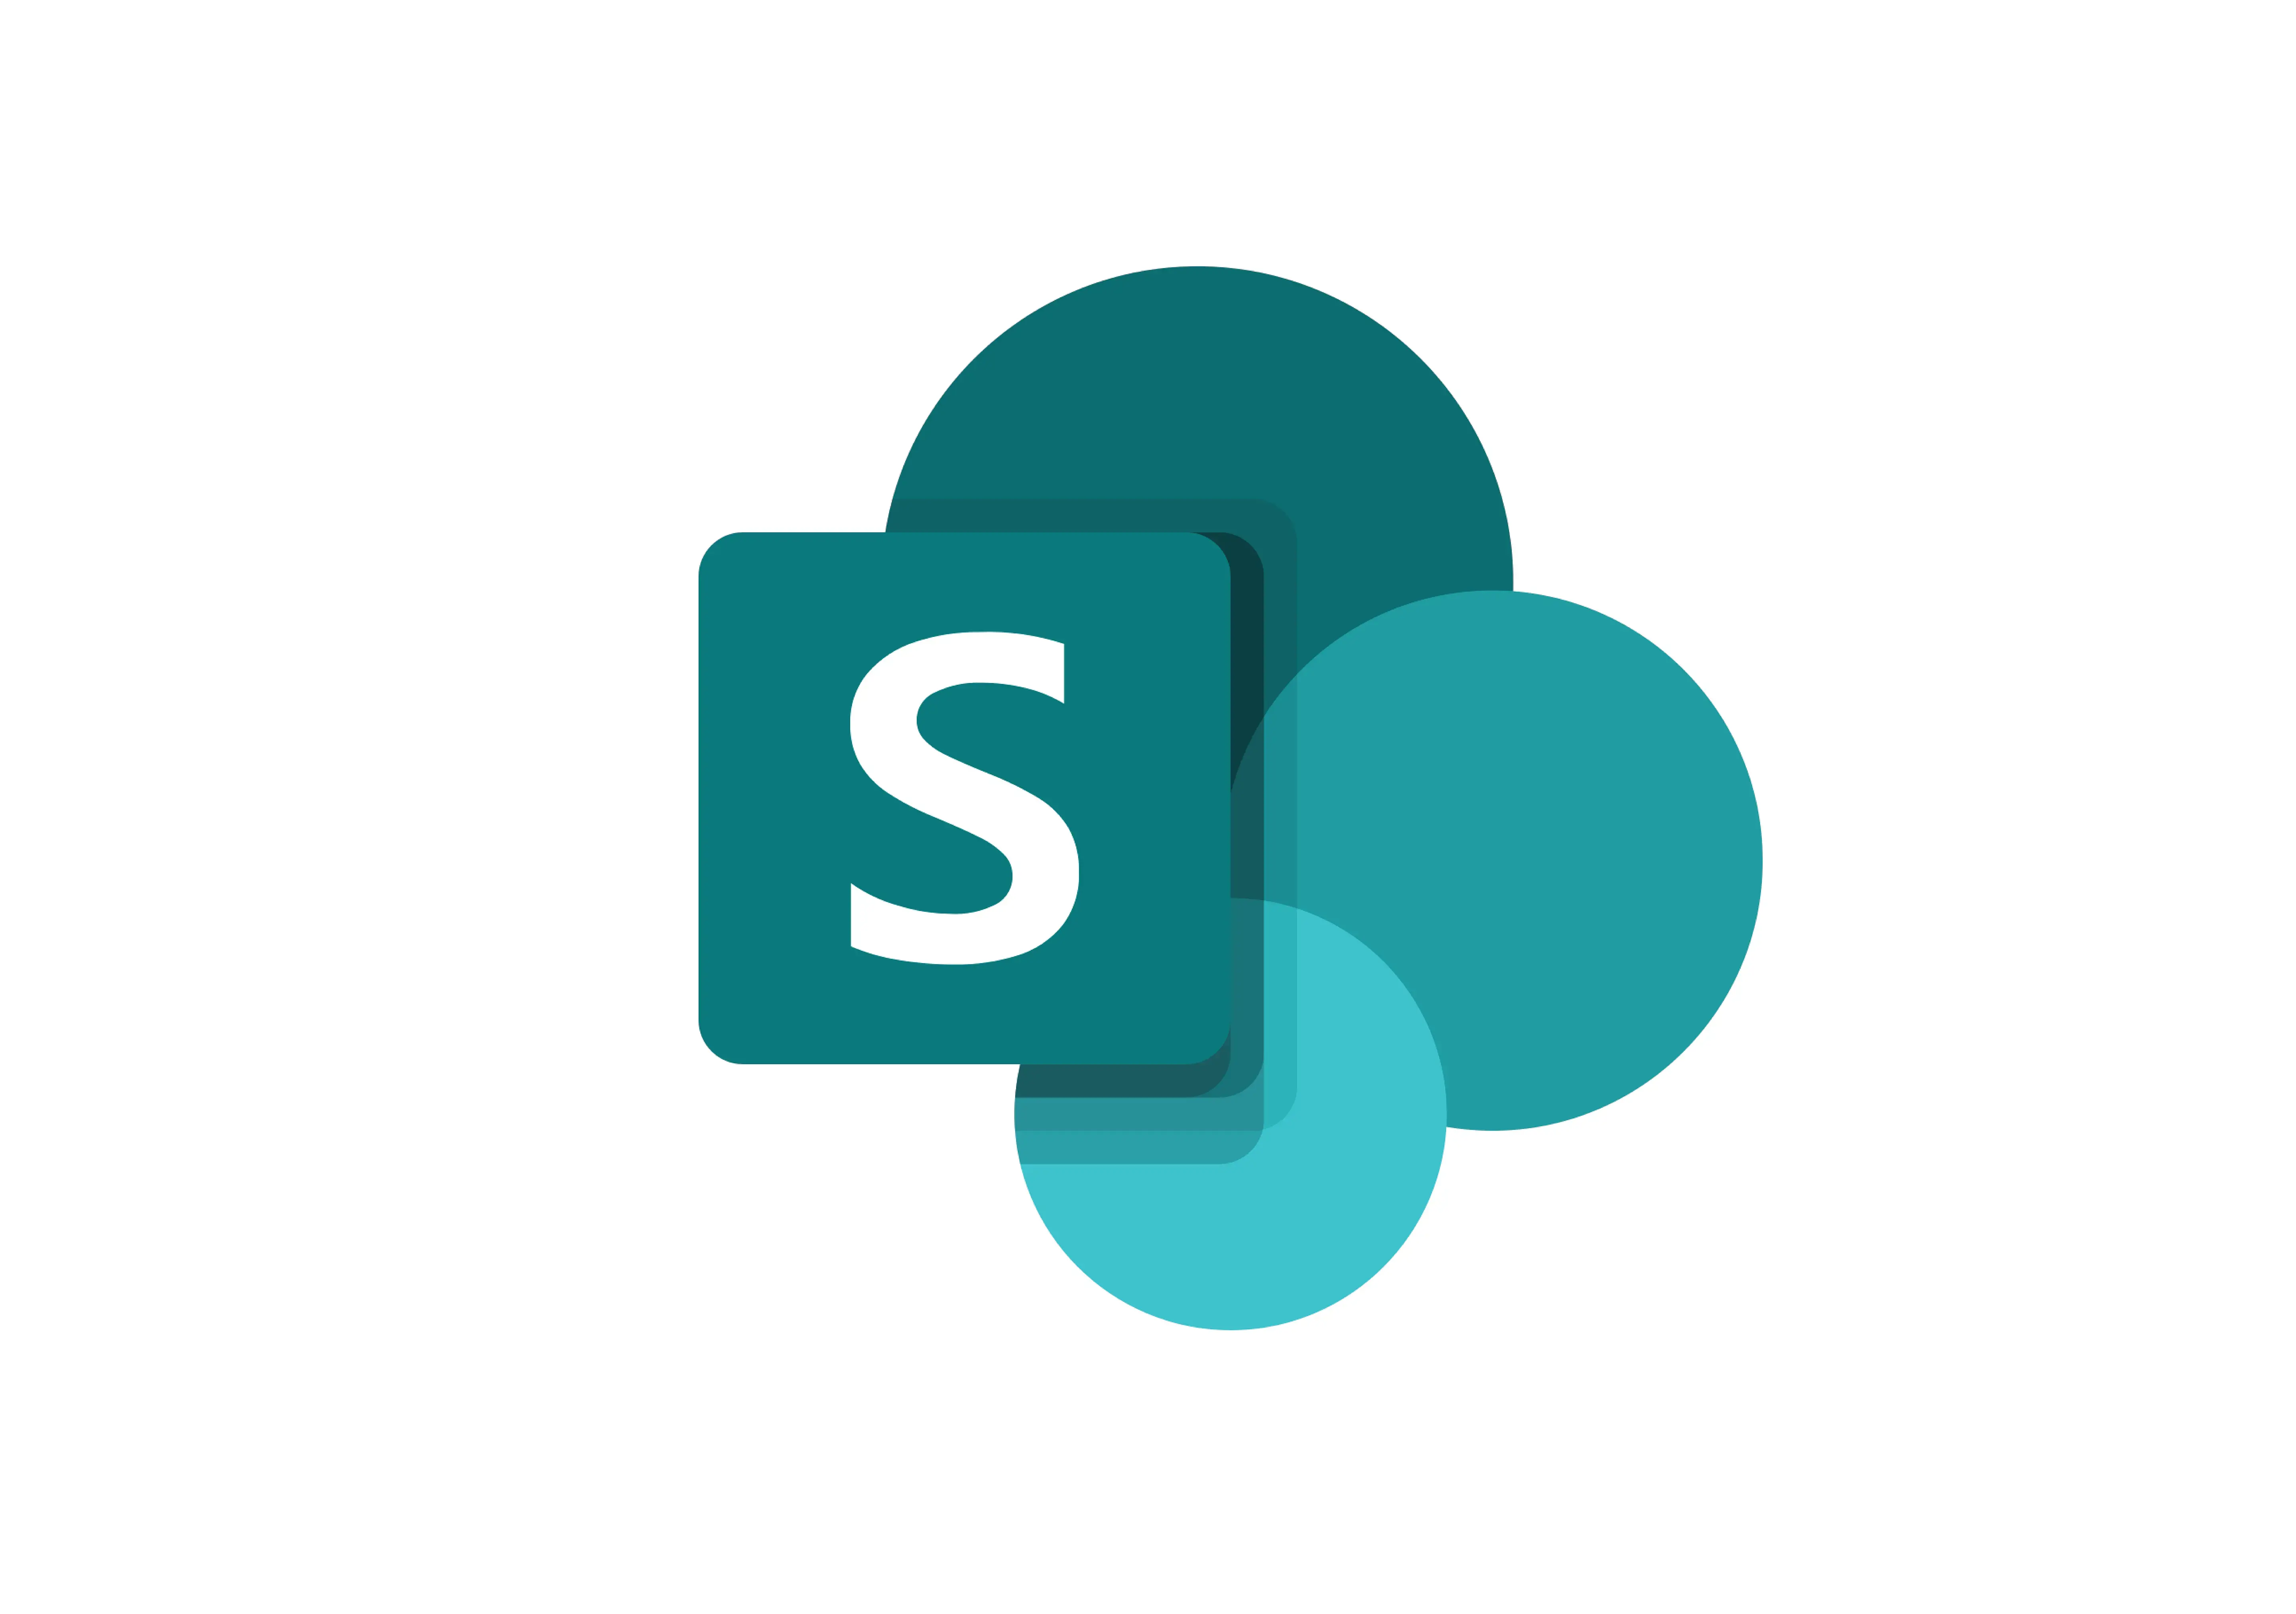 SharePoint application integration connector